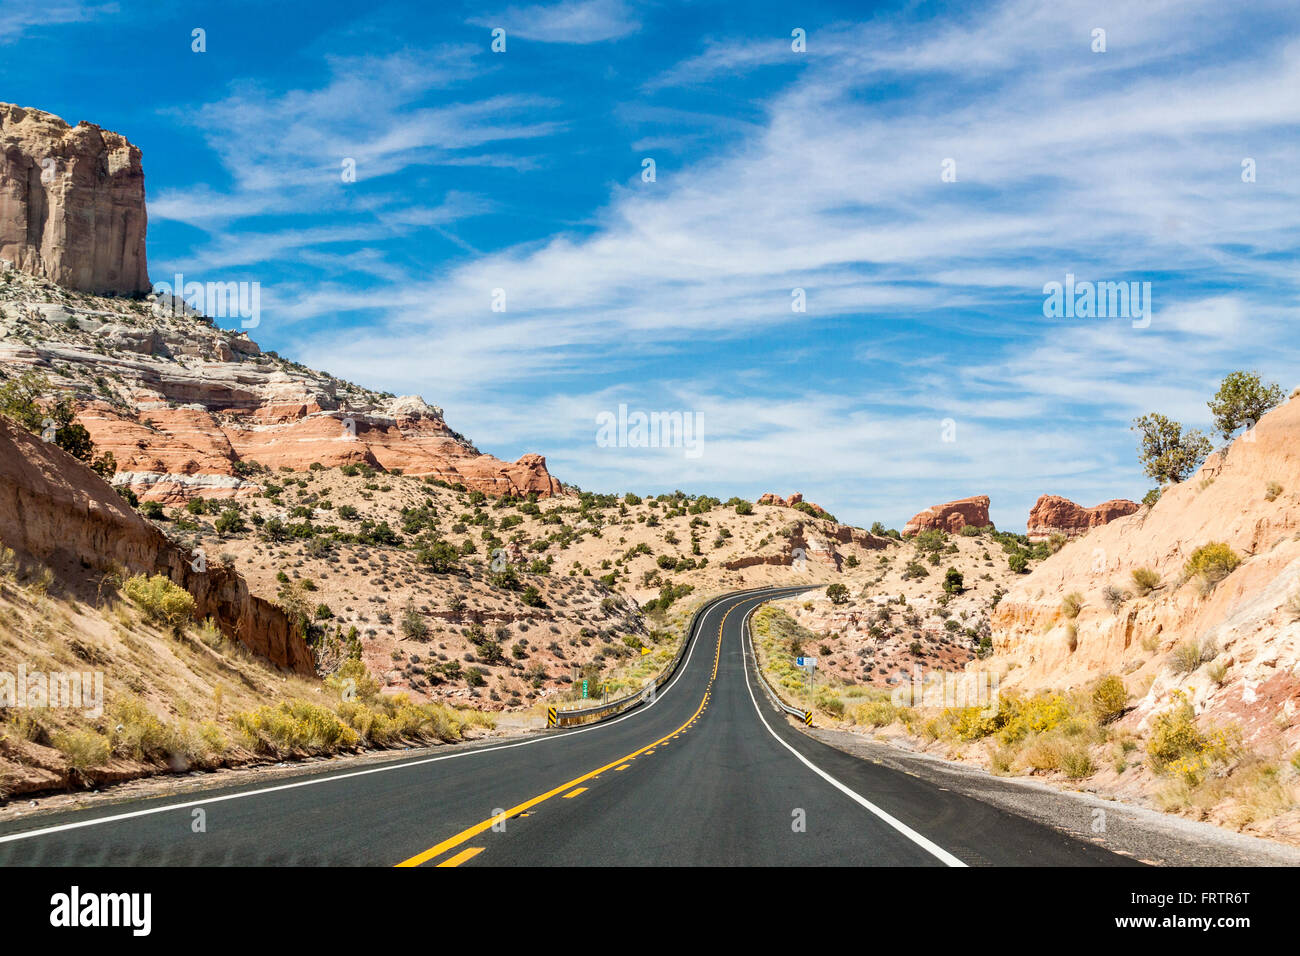 Scenic Byway Arizona 98, from US 160 to Page, Arizona, passes through a dramatic desert landscape of sandstone rock formations. Stock Photo